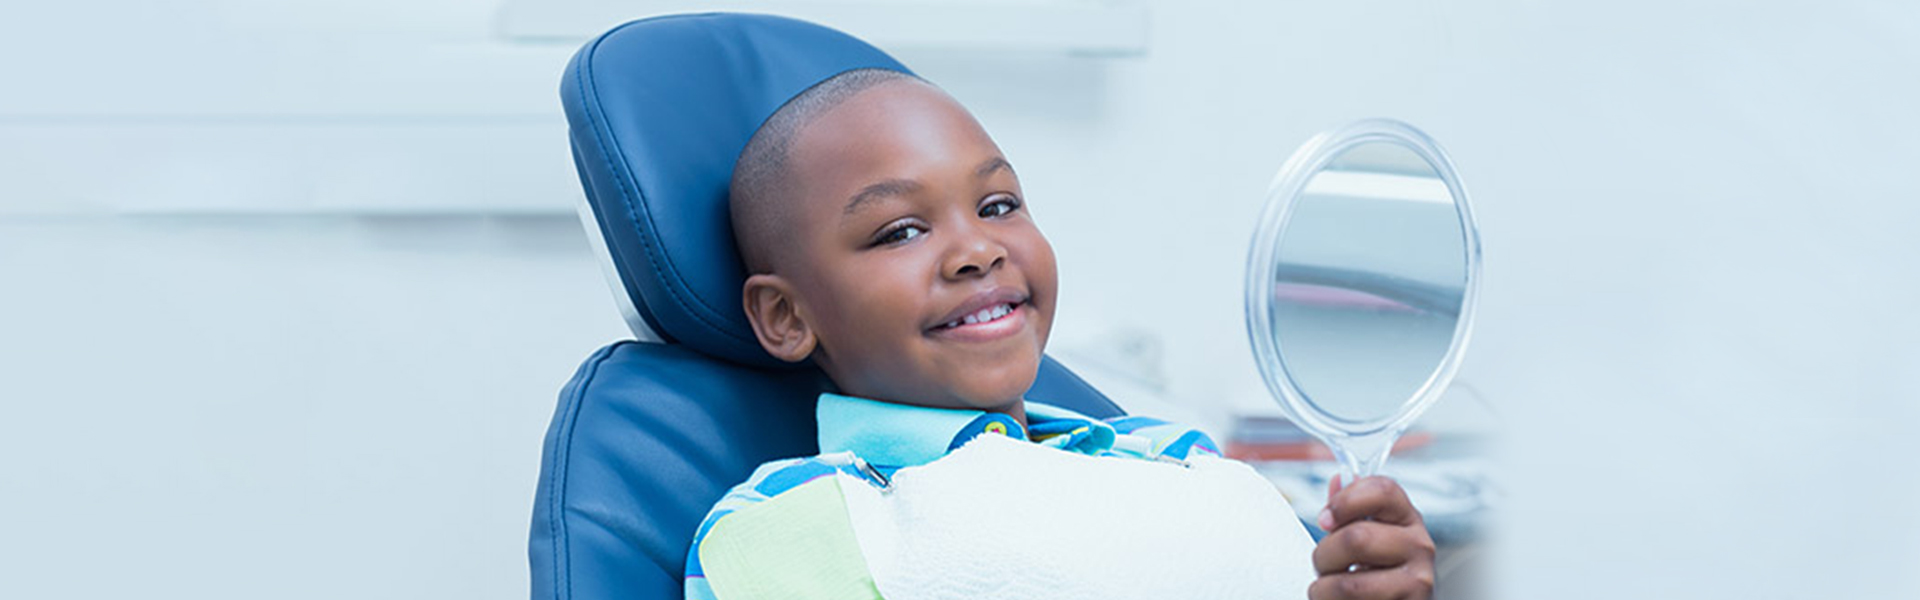 It’s Beneficial to Choose a Pediatric Dentist for Your Child: Here’s Why